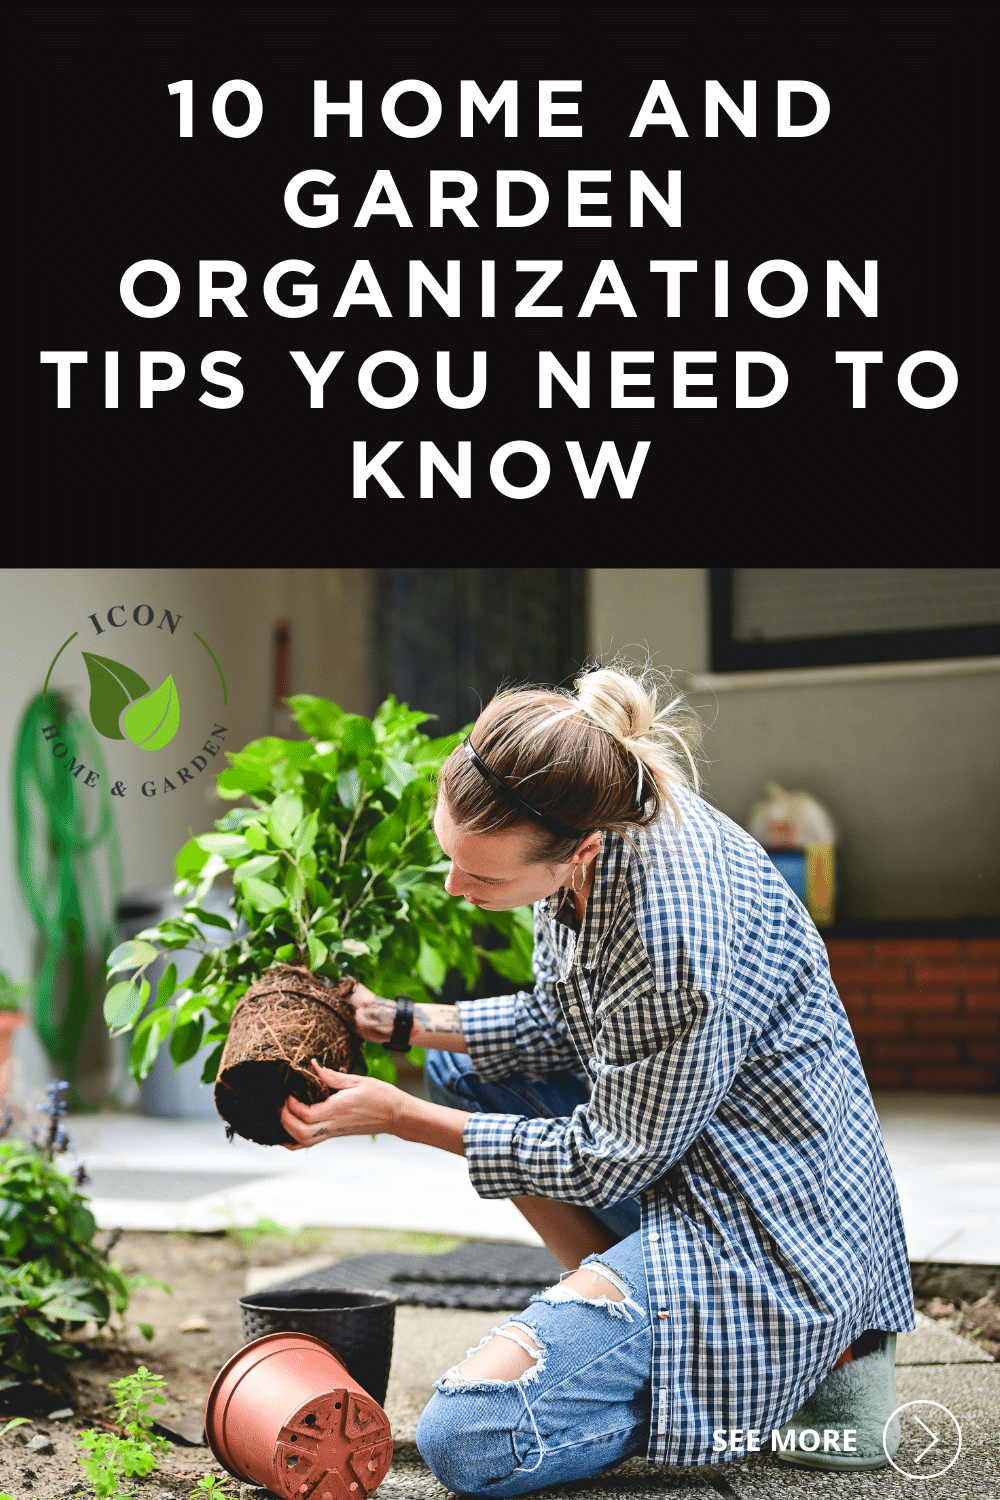 10 Home and Garden Organization Tips You Need to Know